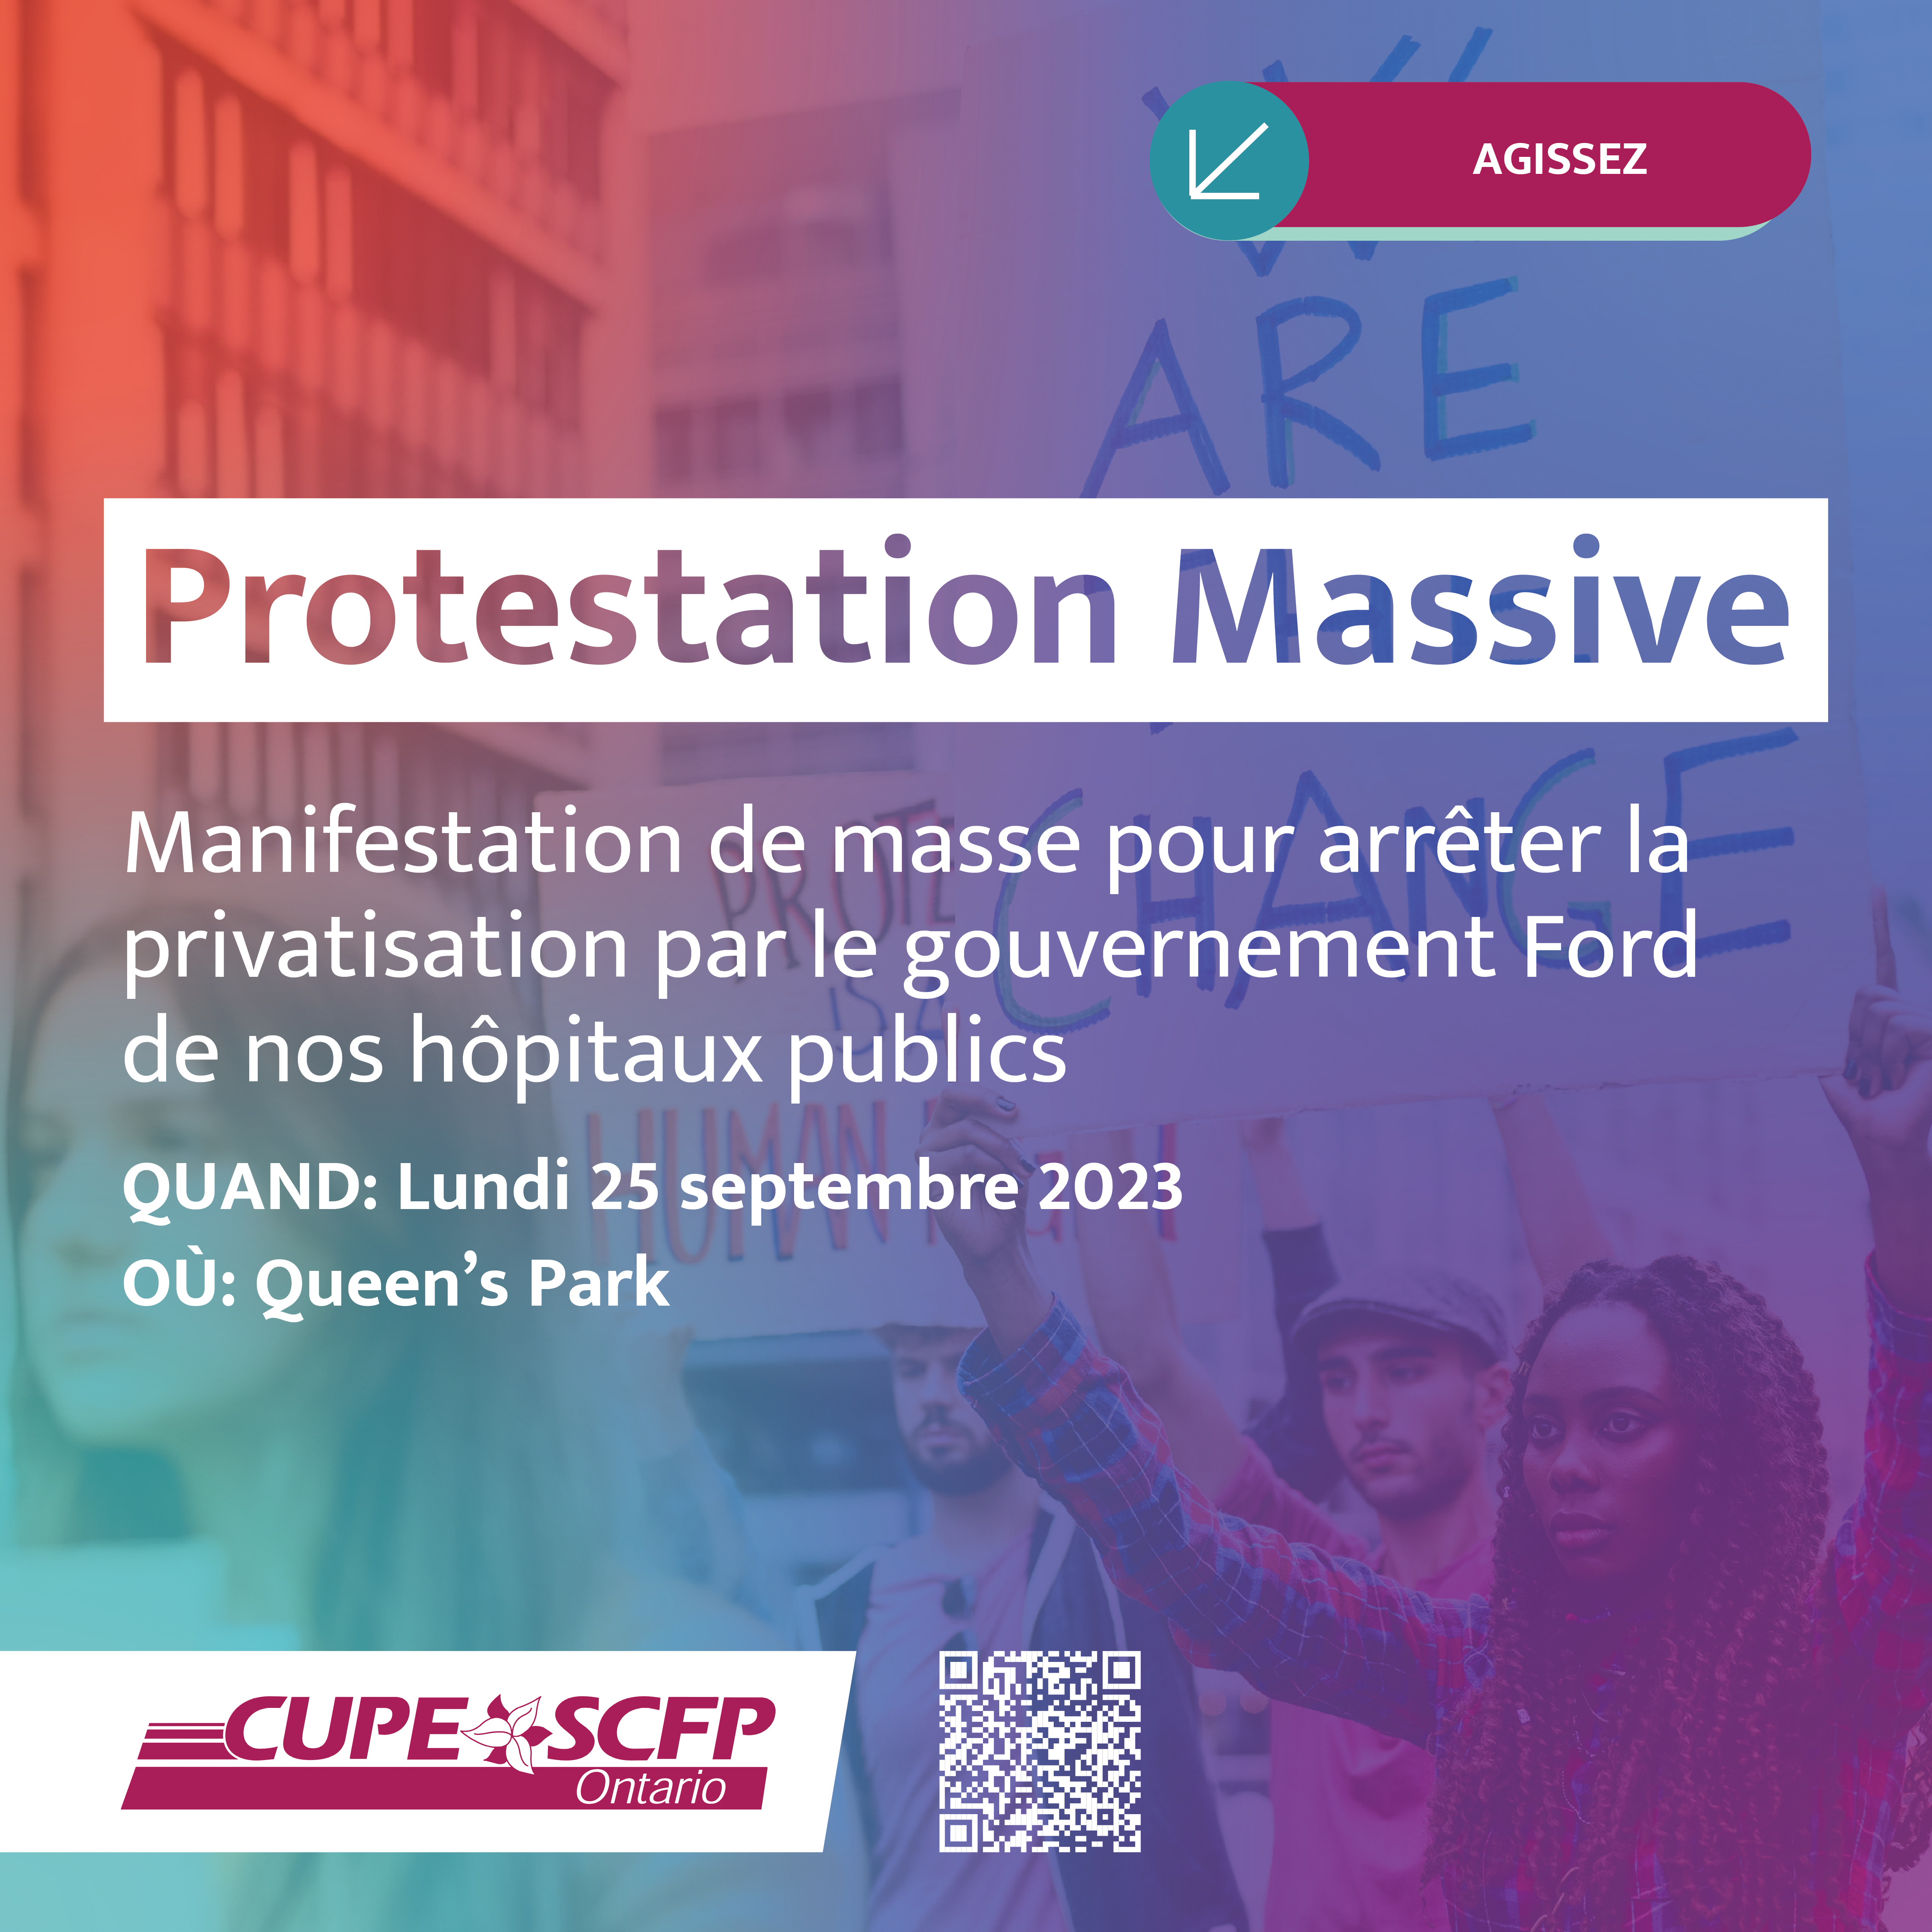 Mass Protest - Stop the Ford Government's Privatization of Our Public Hospitals